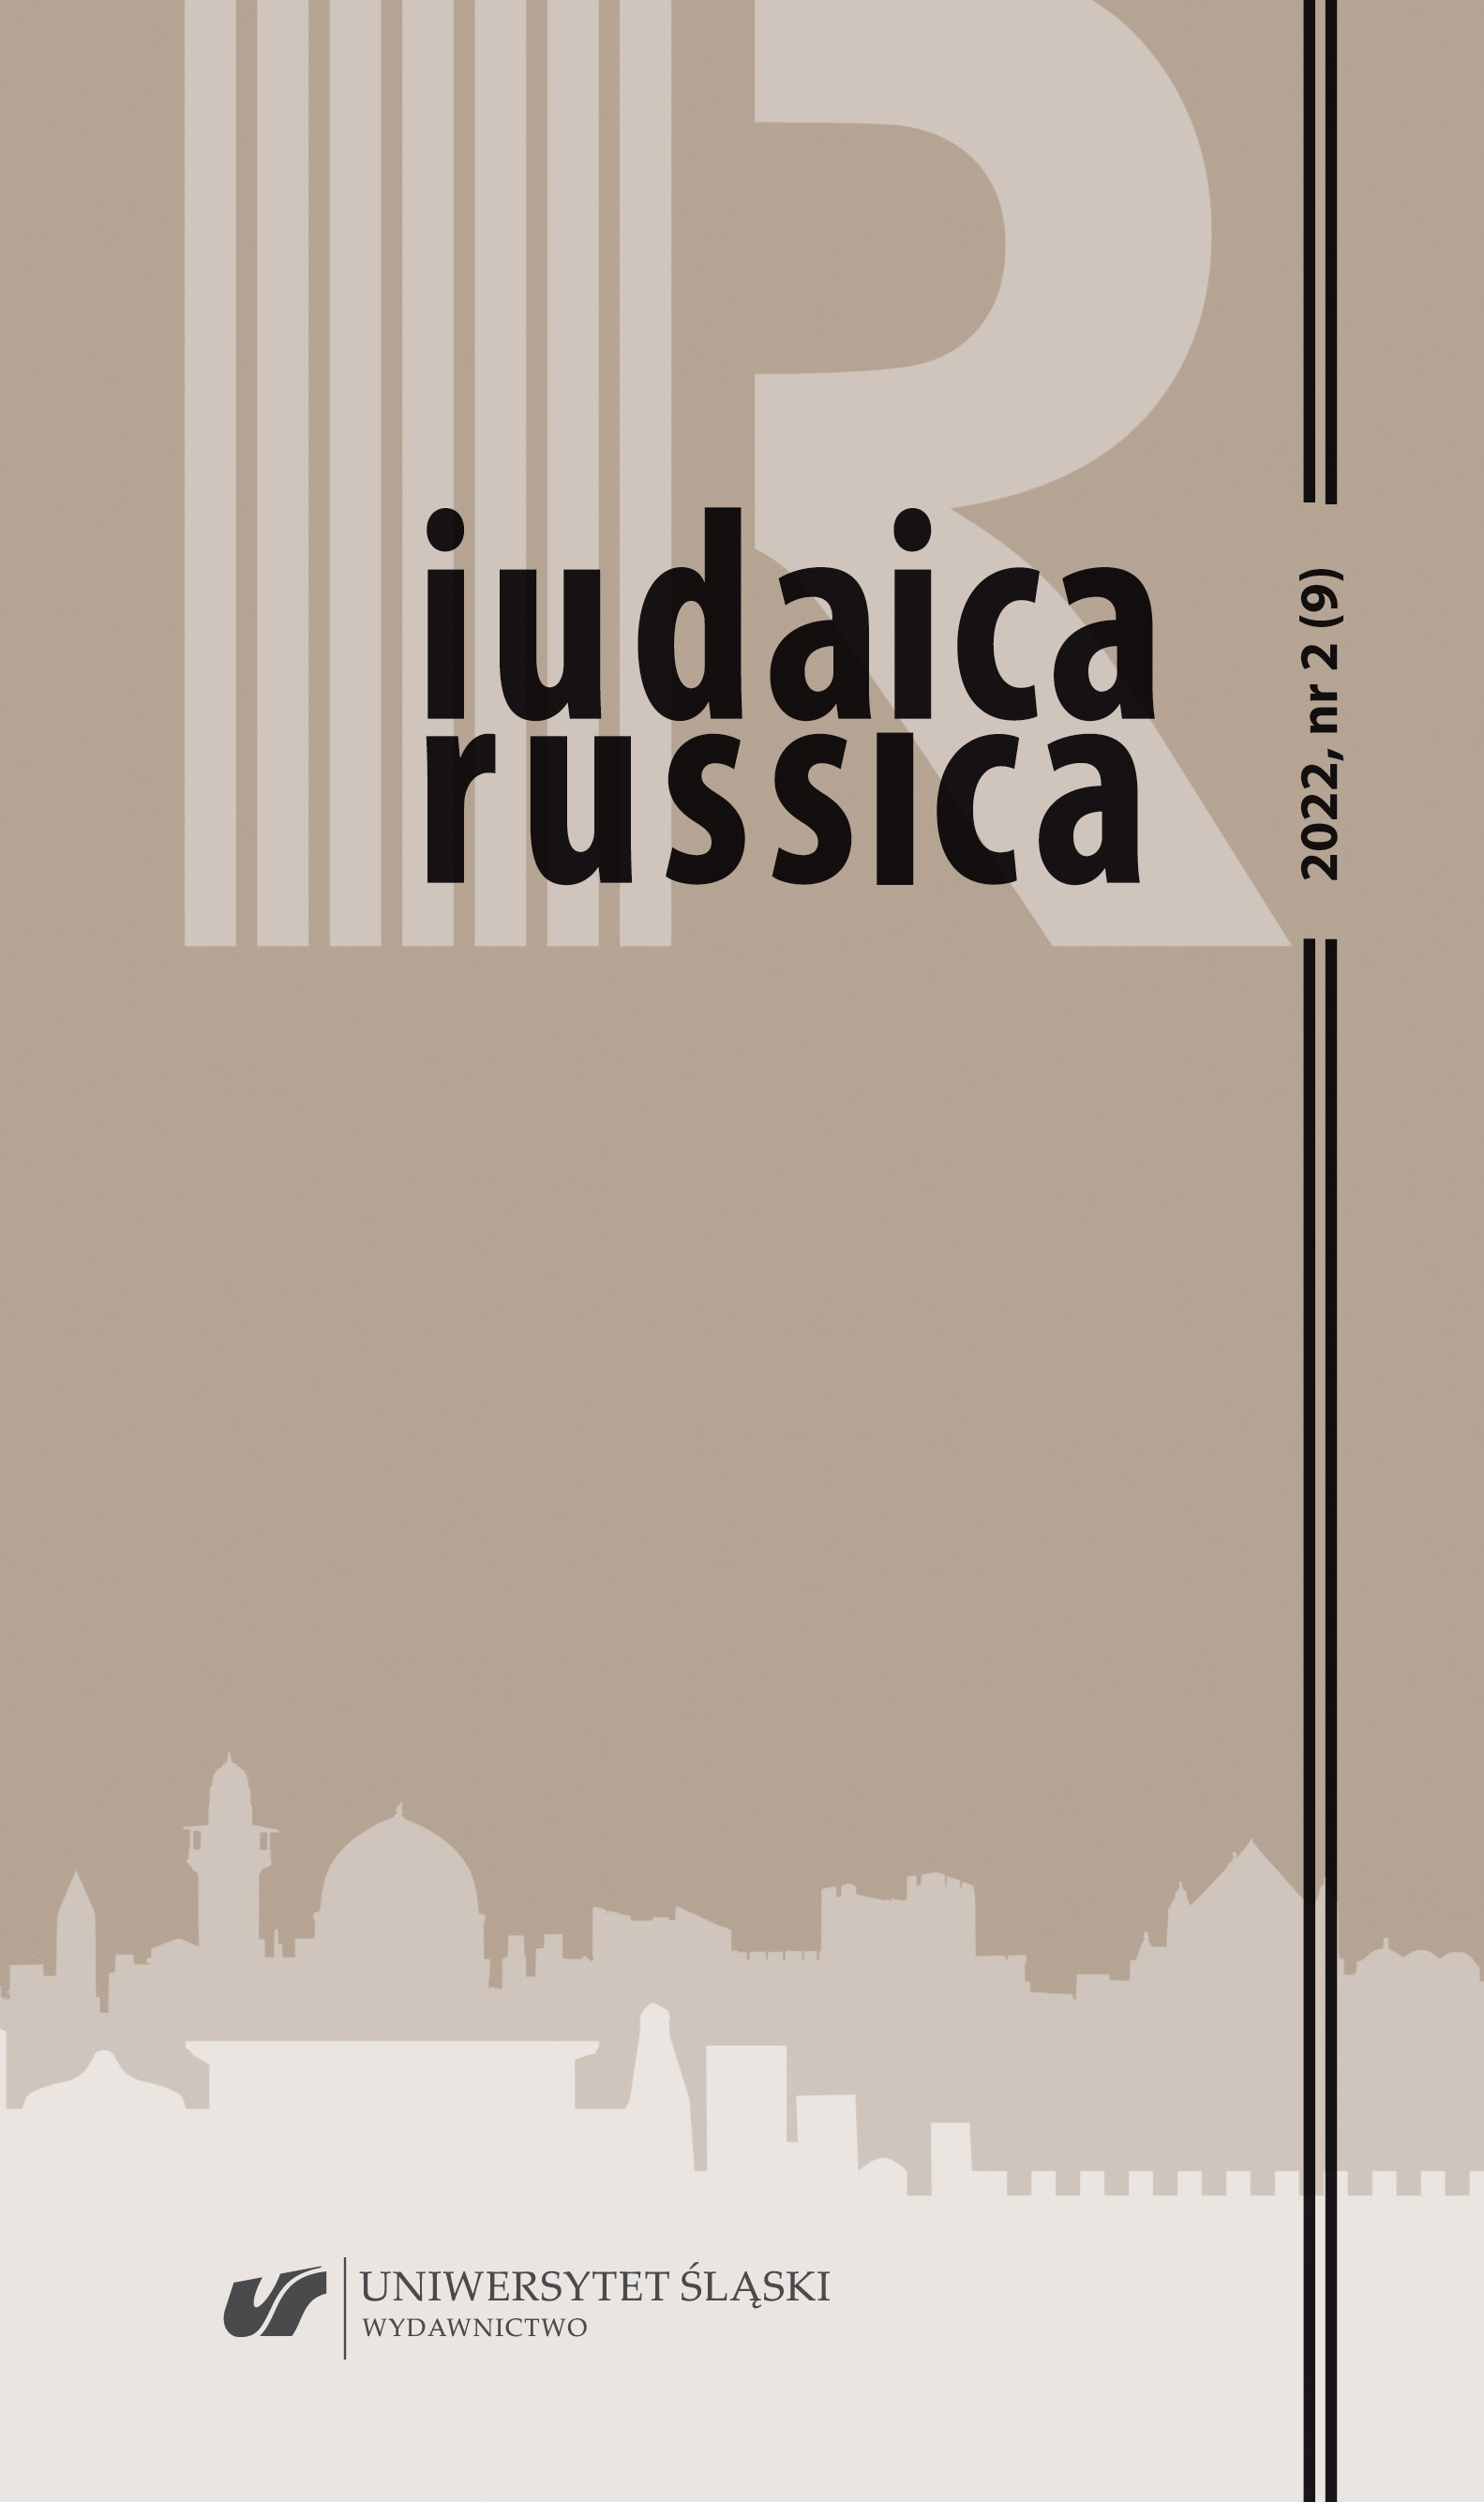 The Treq application in the process of establishing russian-hebrew translation pairs (based on the example of colloquial medical names) Cover Image